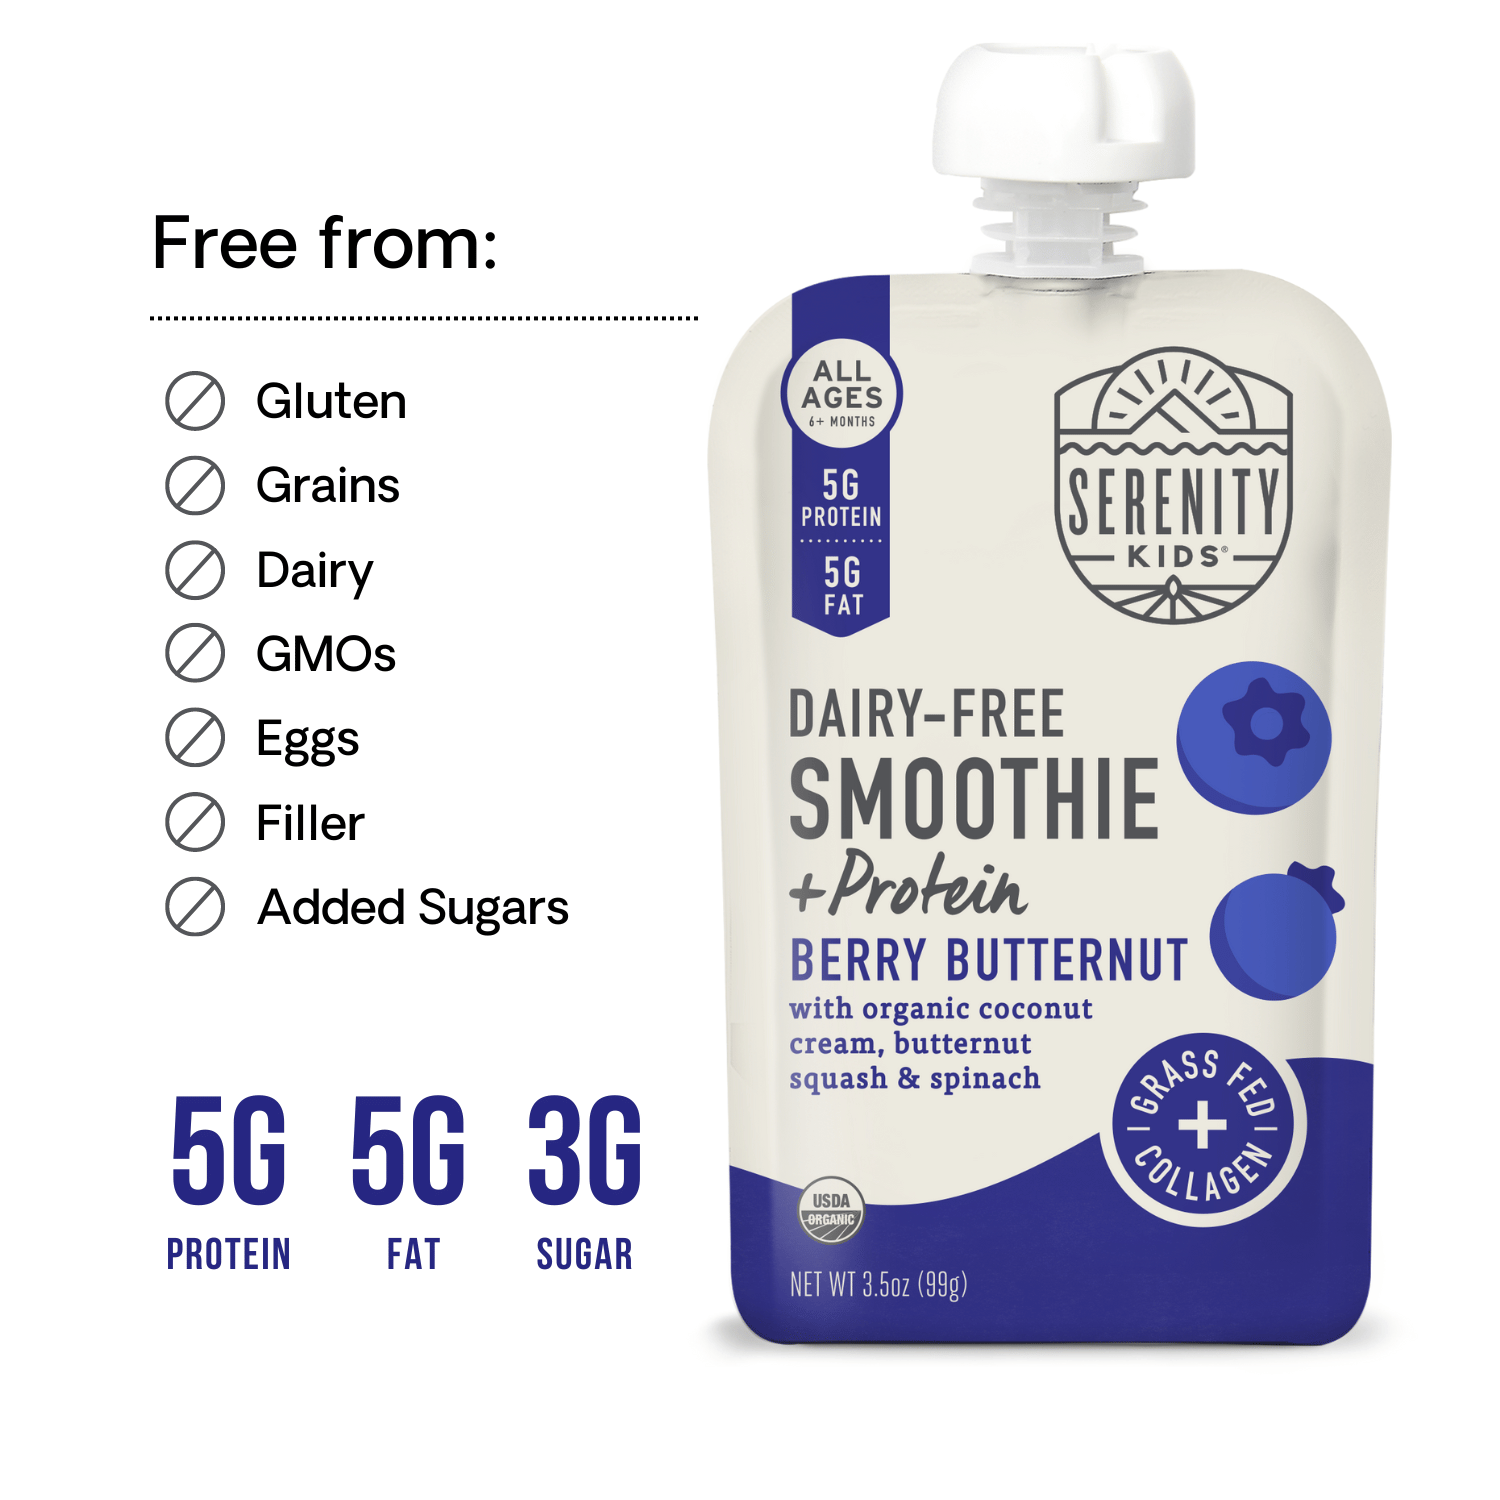 Berry Butternut Dairy-Free Smoothie + Protein - Serenity Kids - Free From Ingredients